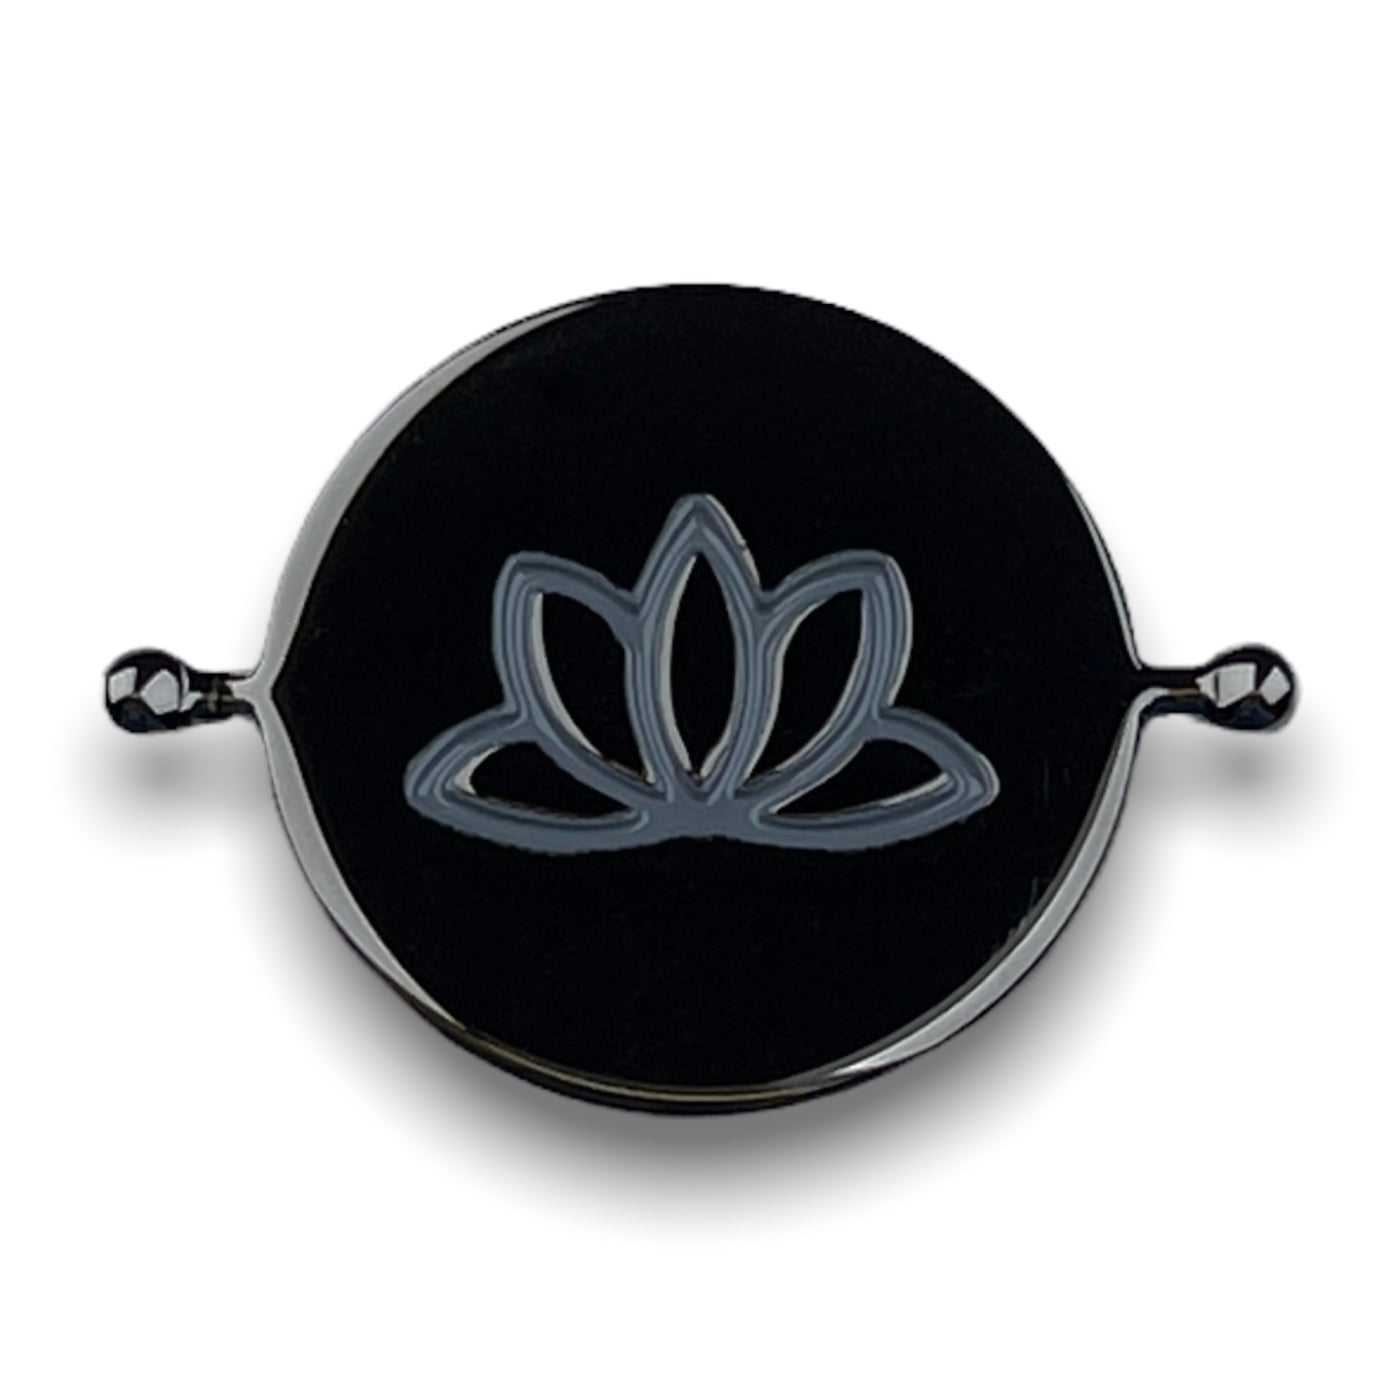 Lotus Flower Symbol Element (spin to combine)